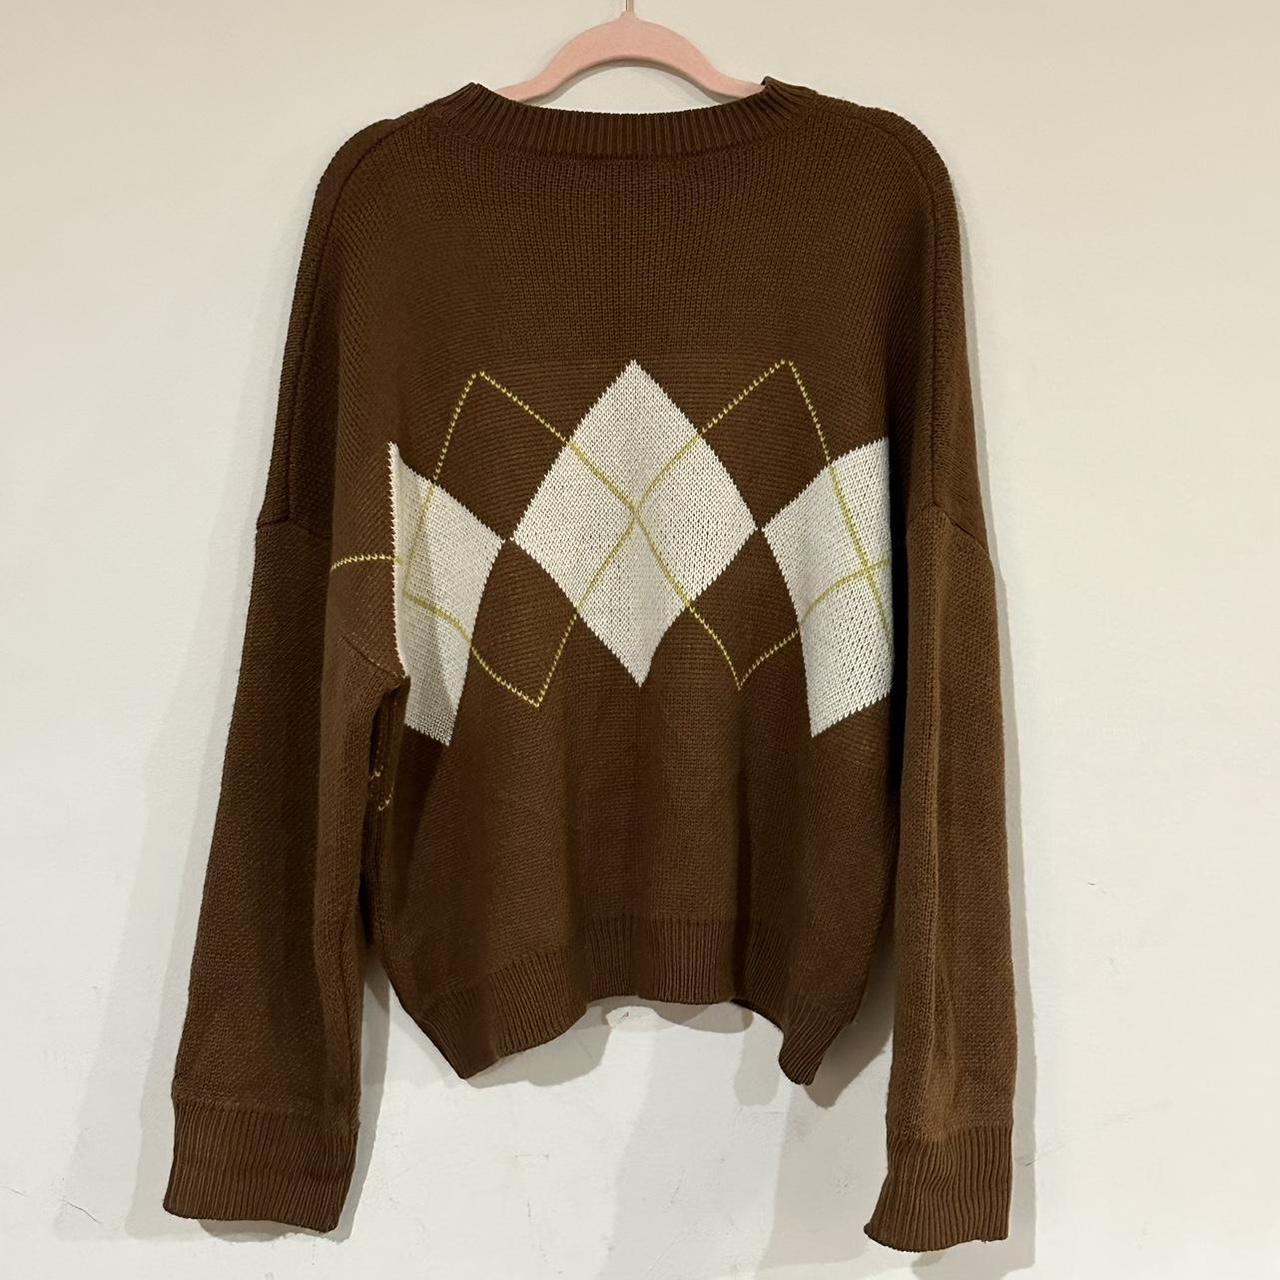 Loose Threads Women's Brown and Cream Jumper